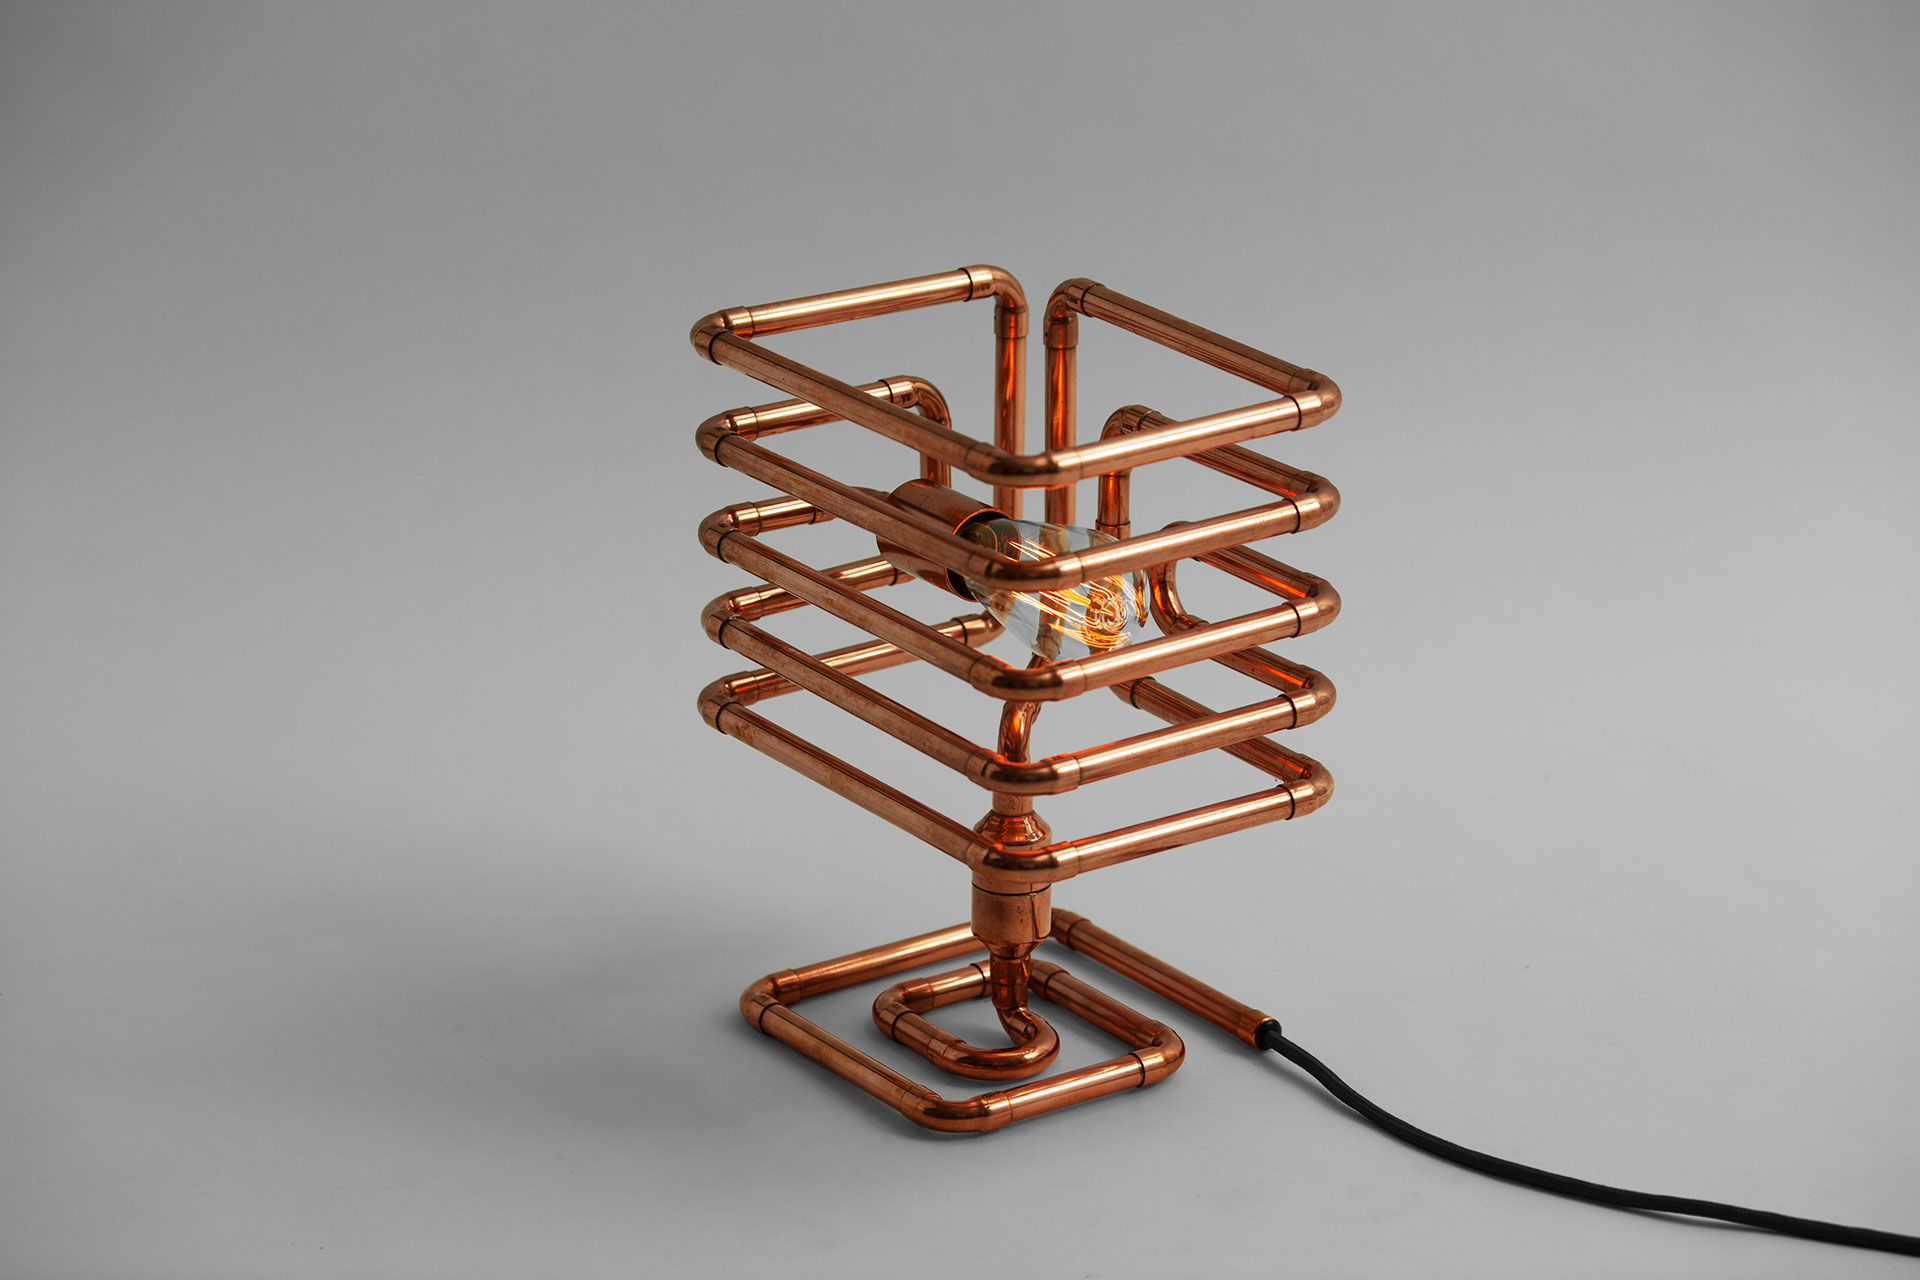 Industrial cage table lamp made of copper pipes with Tesla bulb inspired by steampunk design